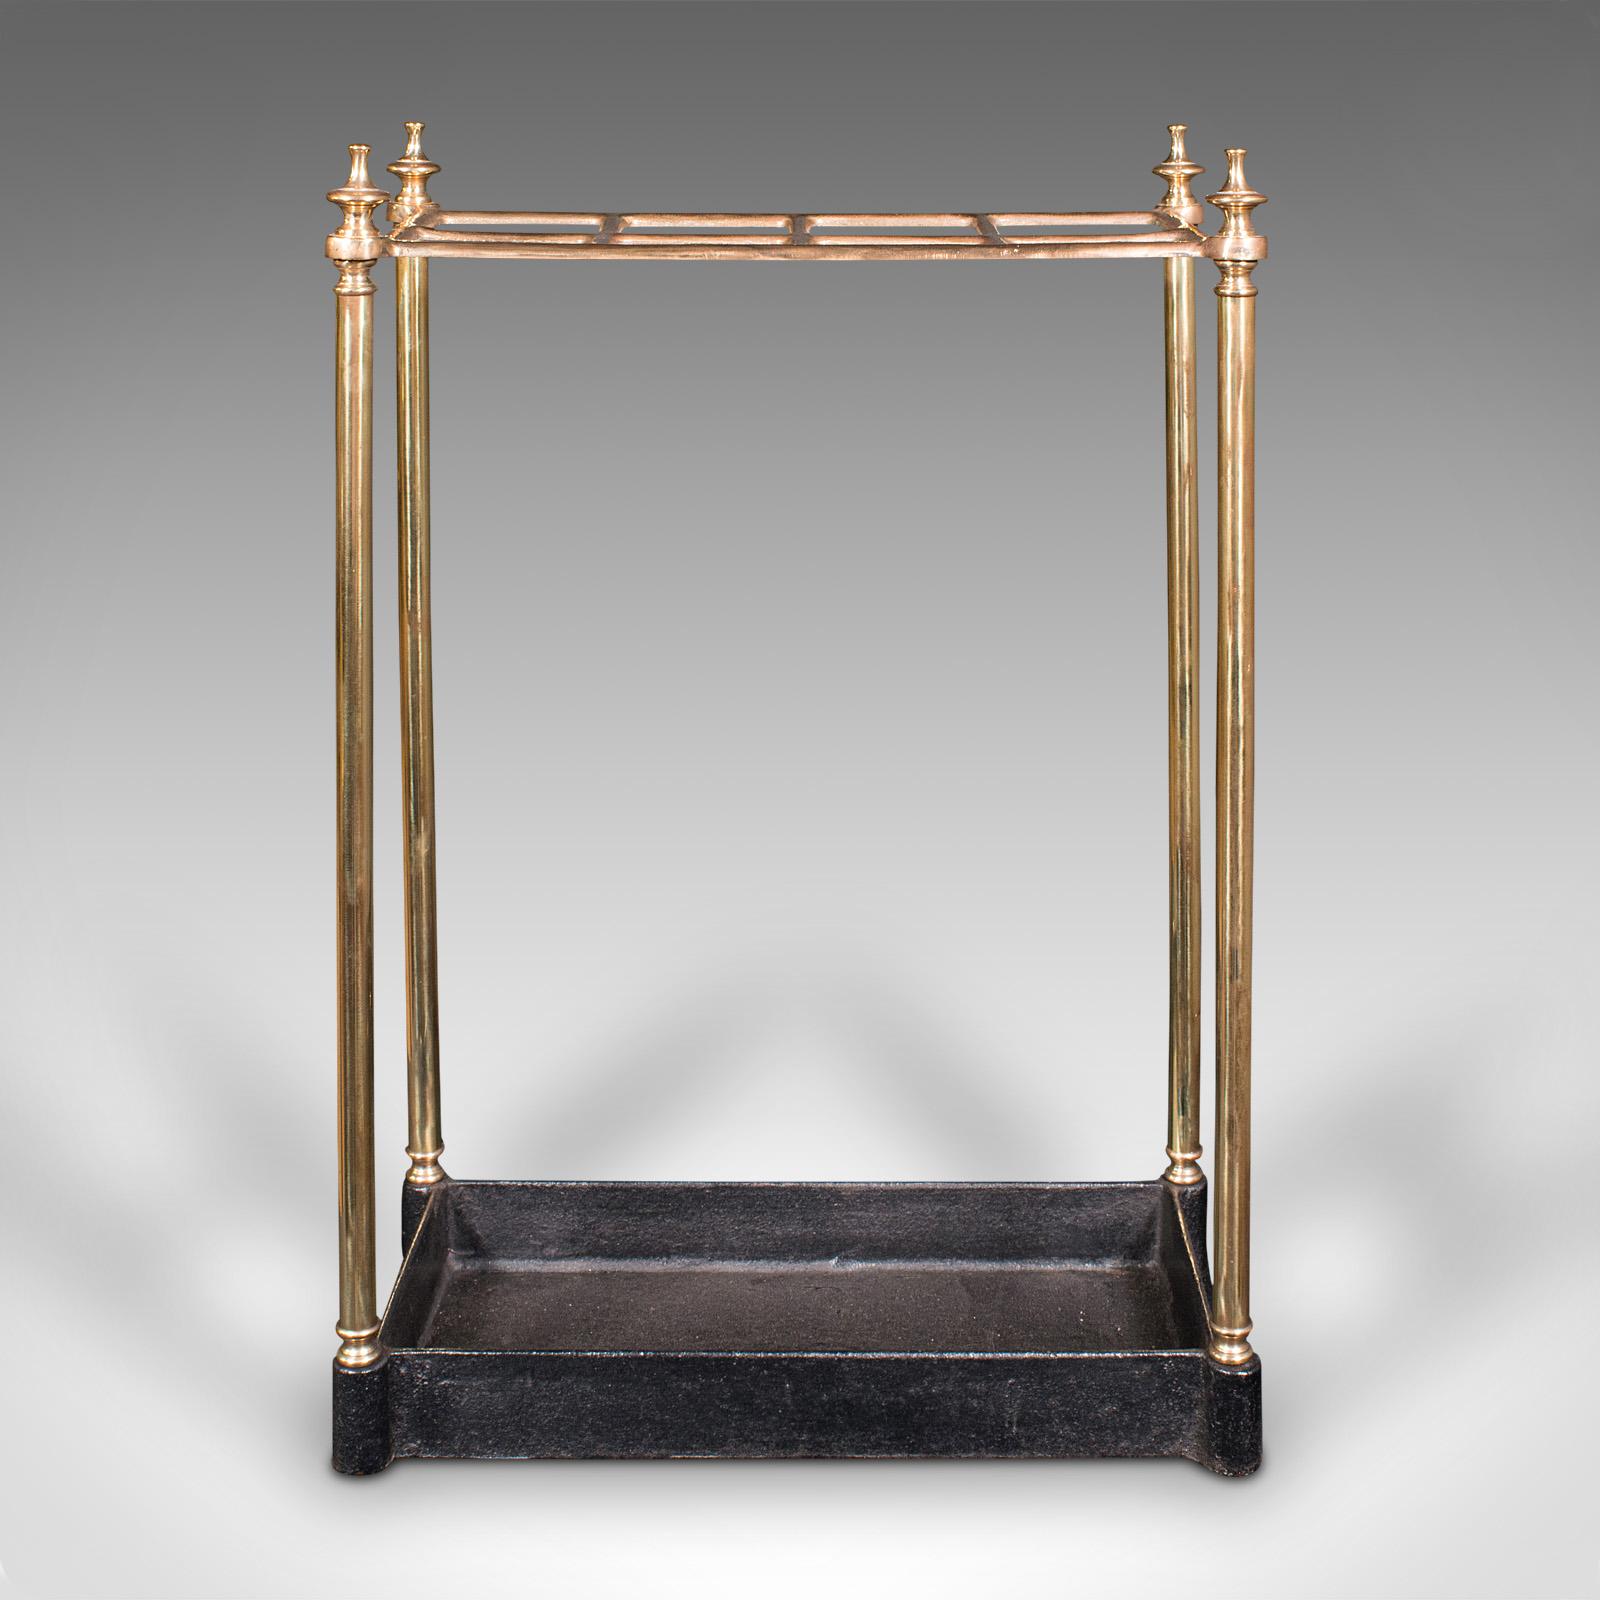 This is an antique segmented stick stand. An English, brass and cast iron hallway rack, dating to the late Victorian period, circa 1900.

Distinctive eight section stick stand with appealing colour
Displays a desirable aged patina